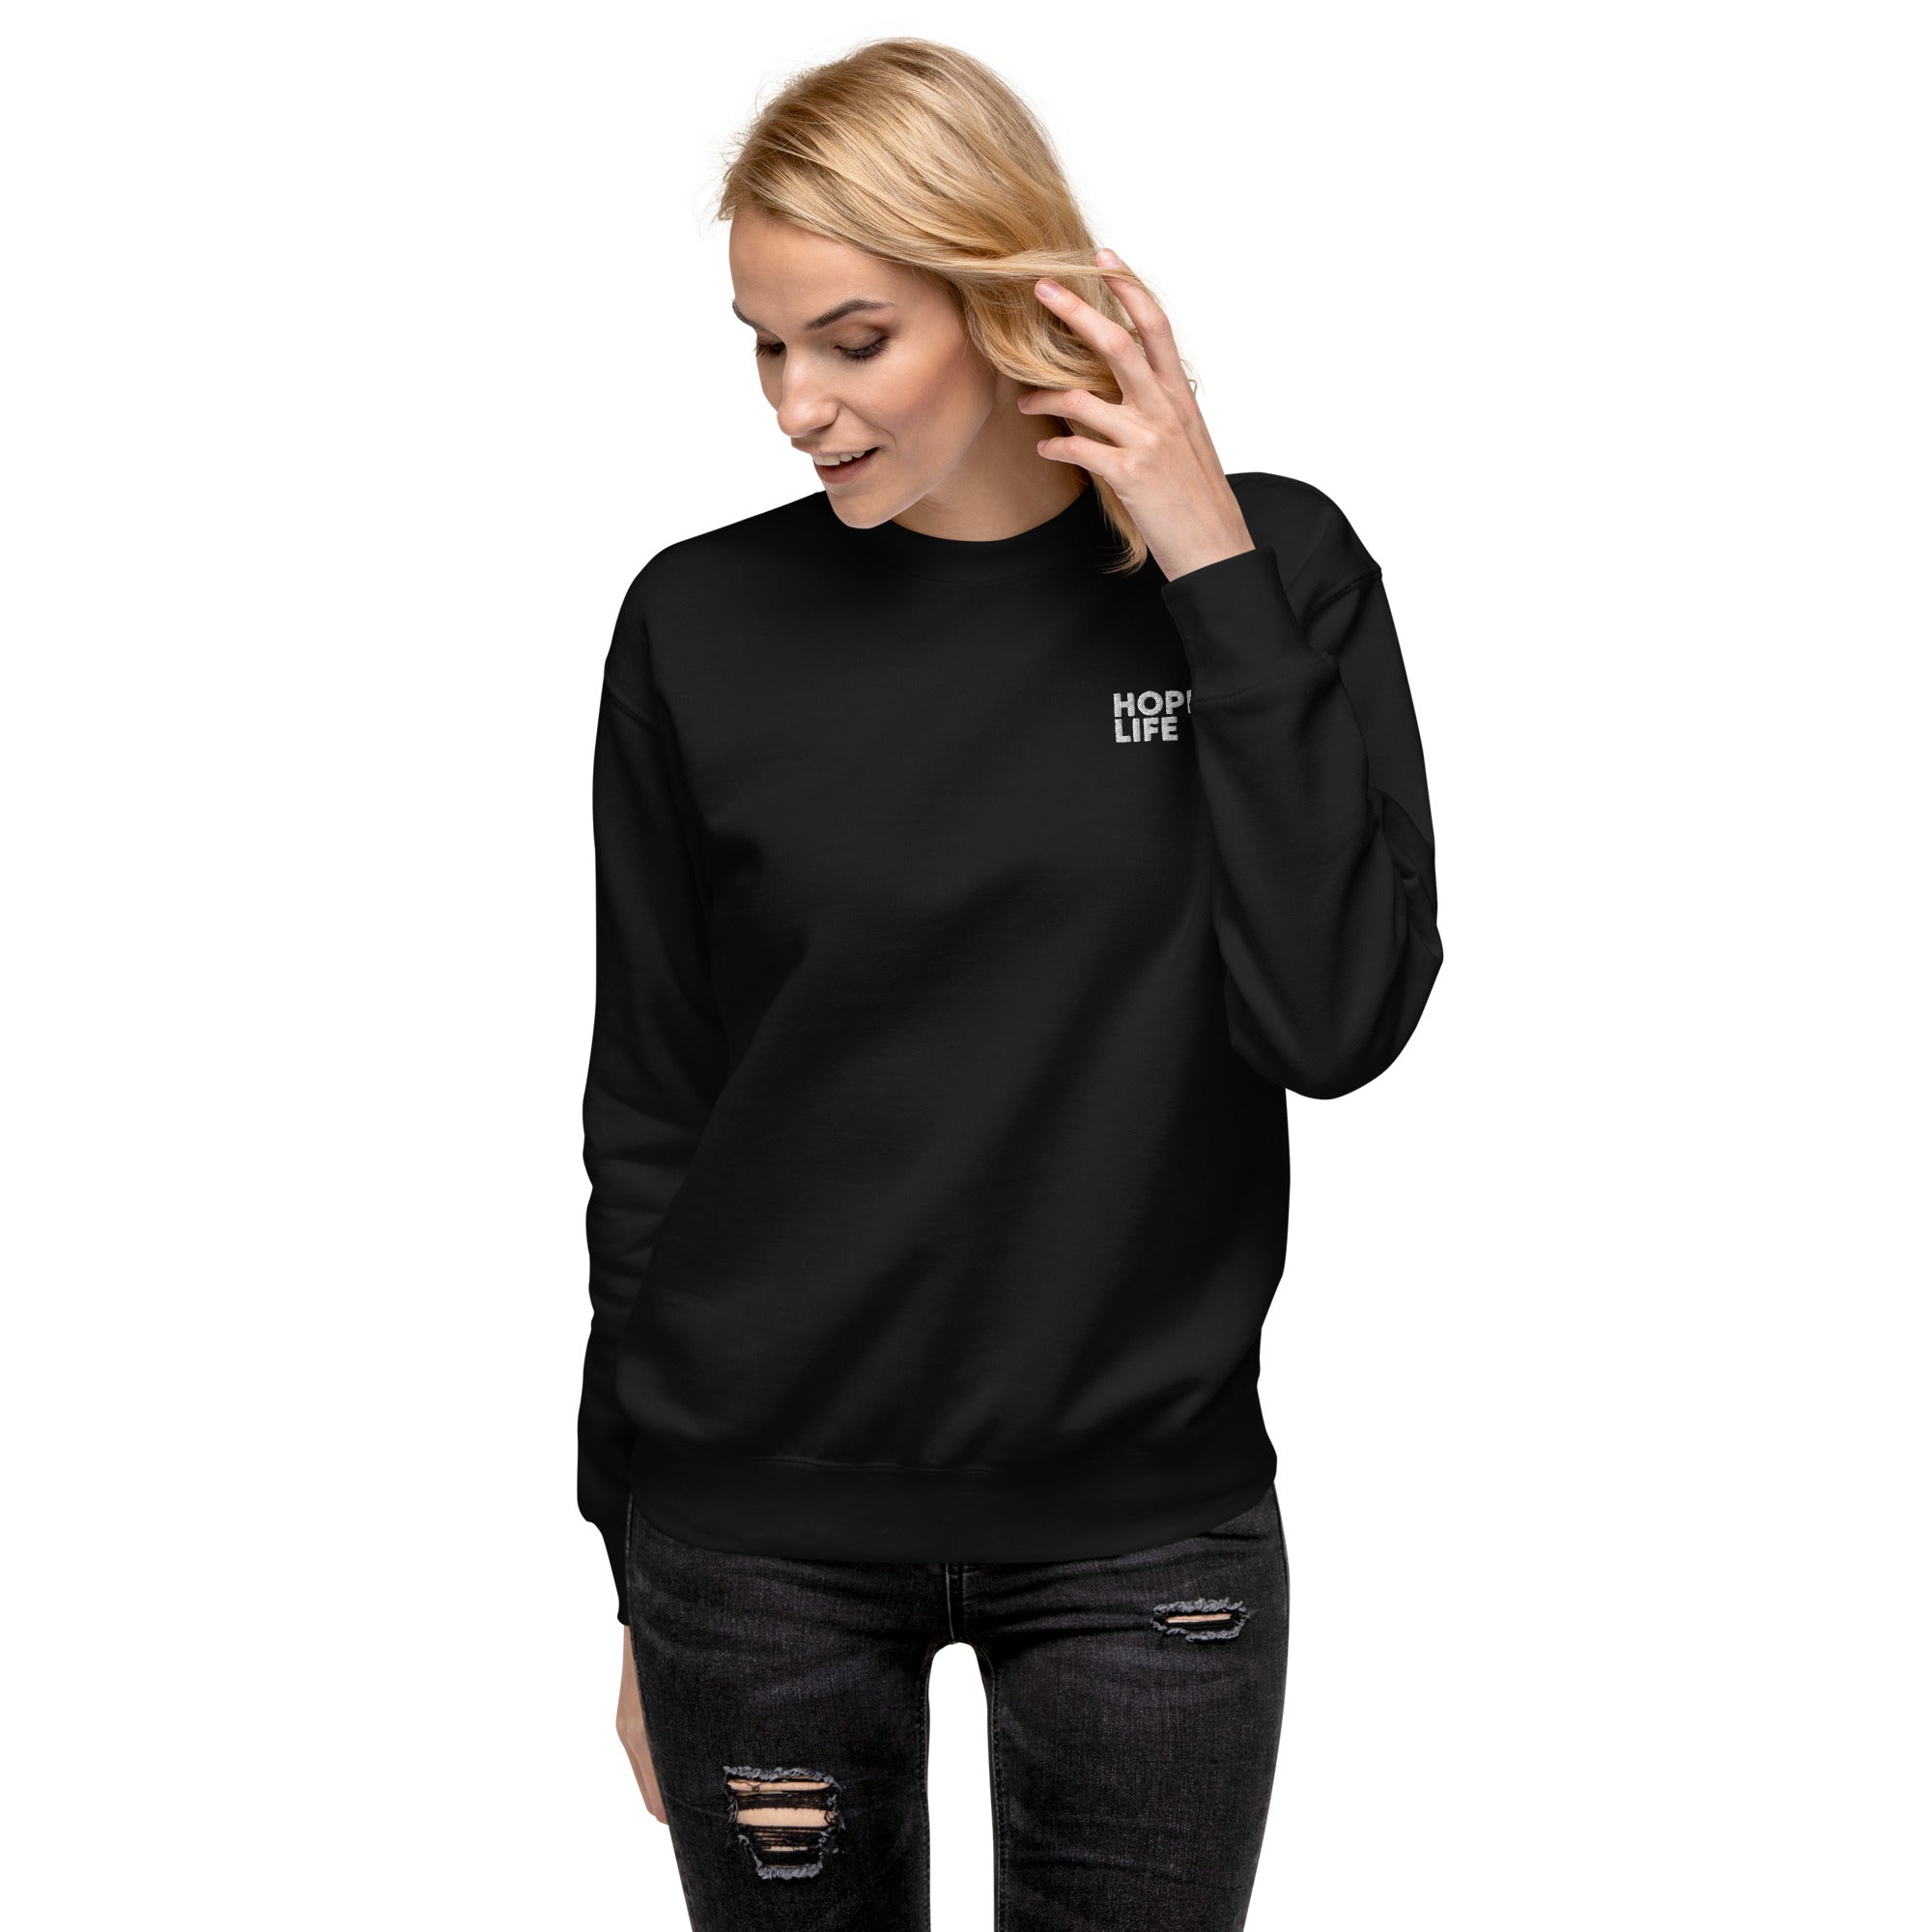 YWEFSJ Womens Sweatshirts And Hoodies Black Of Friday Apparel Cropped  Sweatshirt Zip Up Cyber Of Monday Deals tring Hoo,B1-d,X-Small Birthday  Gifts For Women Prime of Day Deals Today 2023 Kitchen at